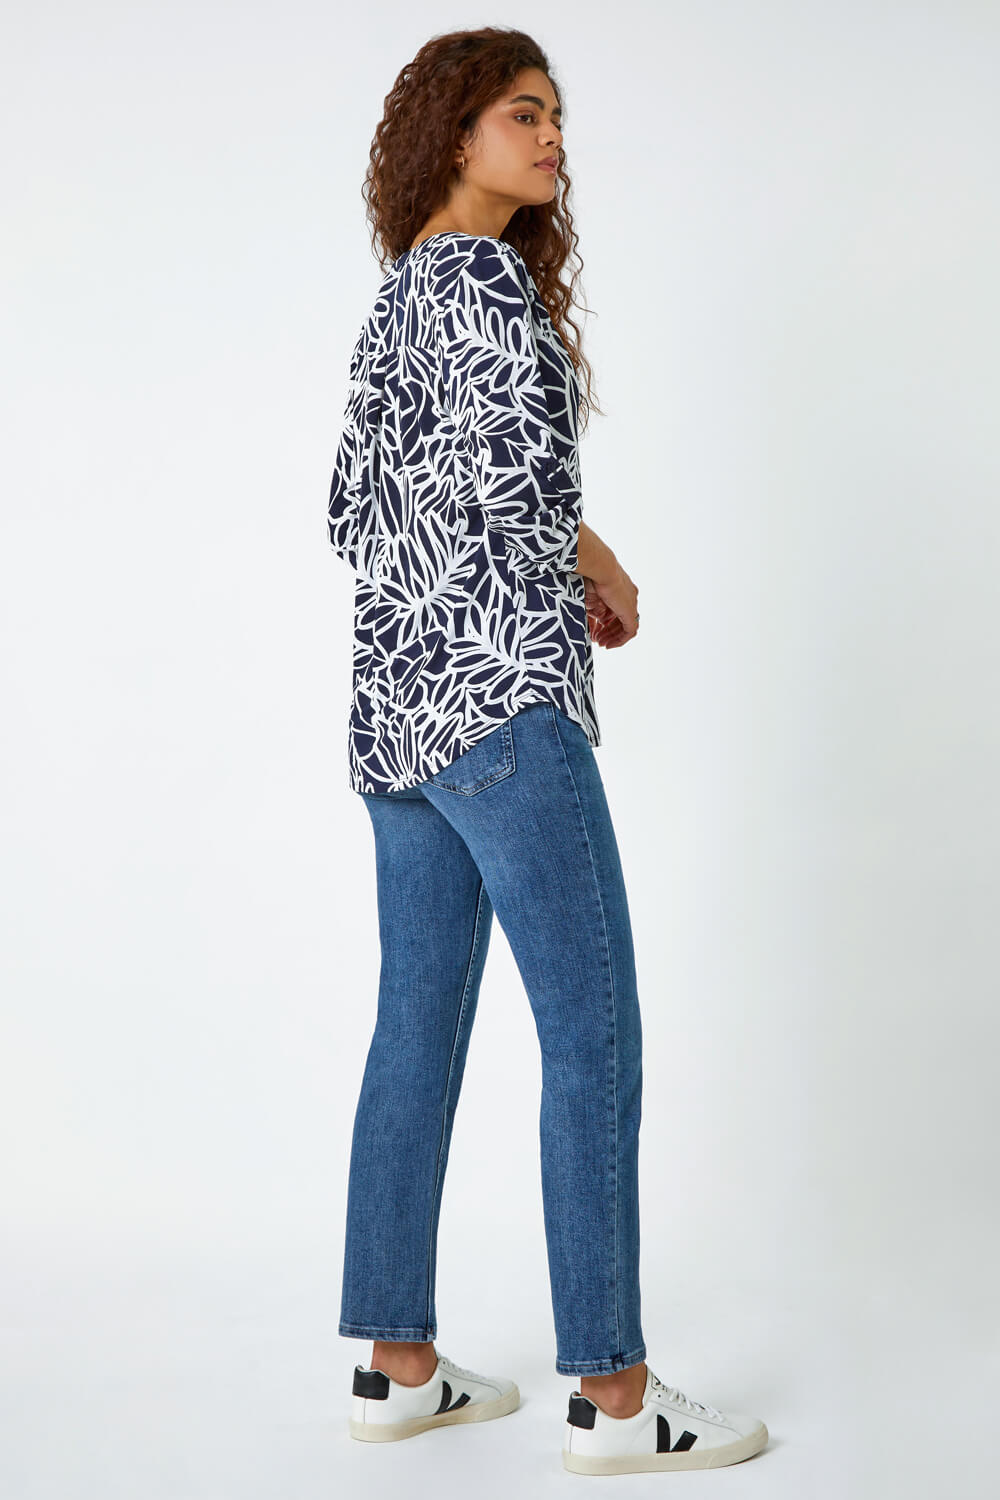 Navy  Textured Floral Print Stretch Top , Image 3 of 5